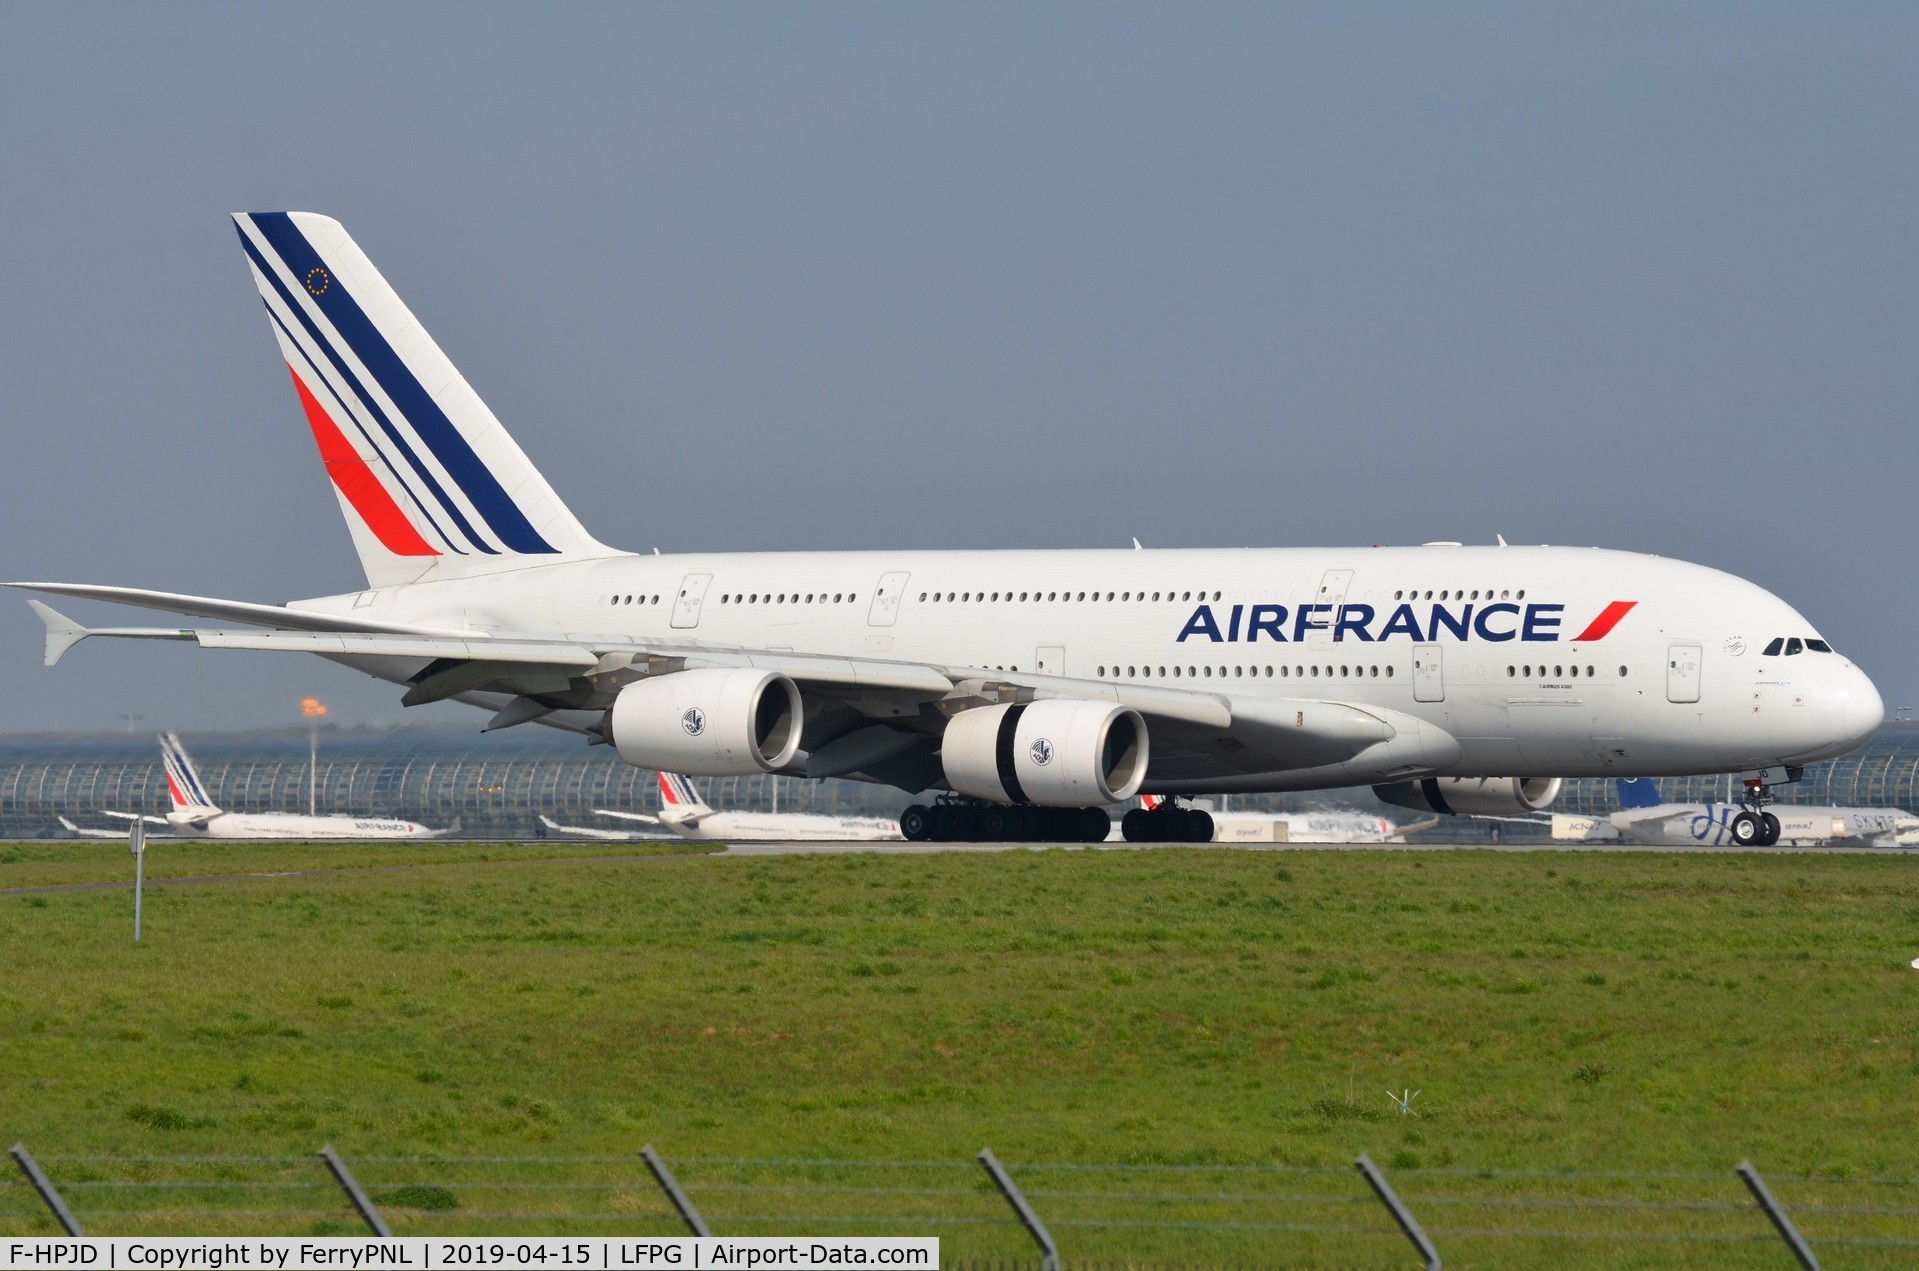 F-HPJD, 2010 Airbus A380-861 C/N 049, Arrival of Air France A388.